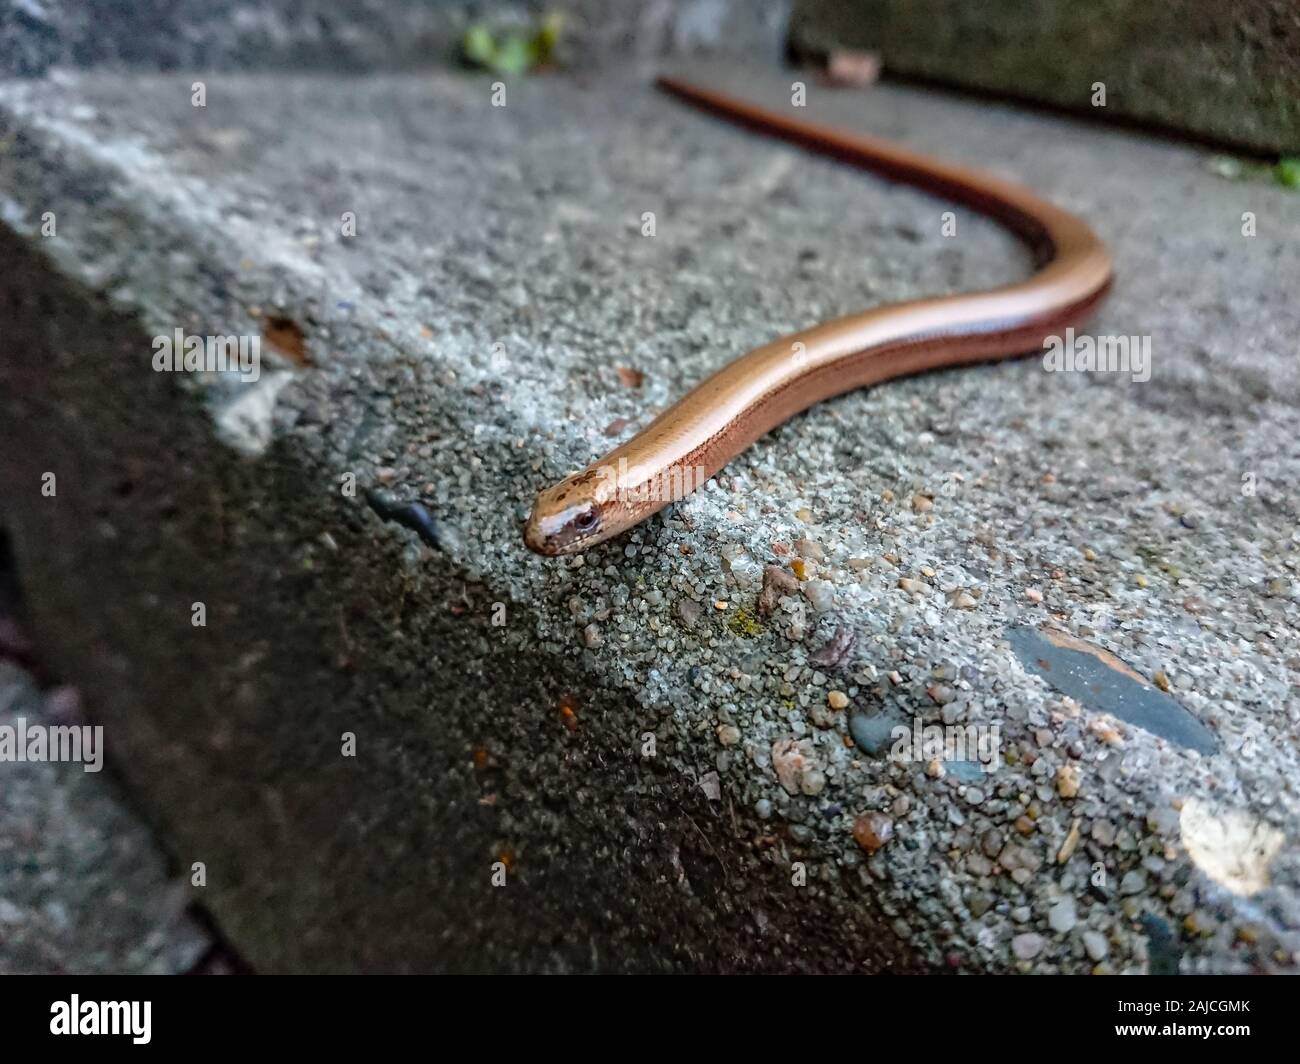 A slow worm on a stone staircase in a garden Stock Photo